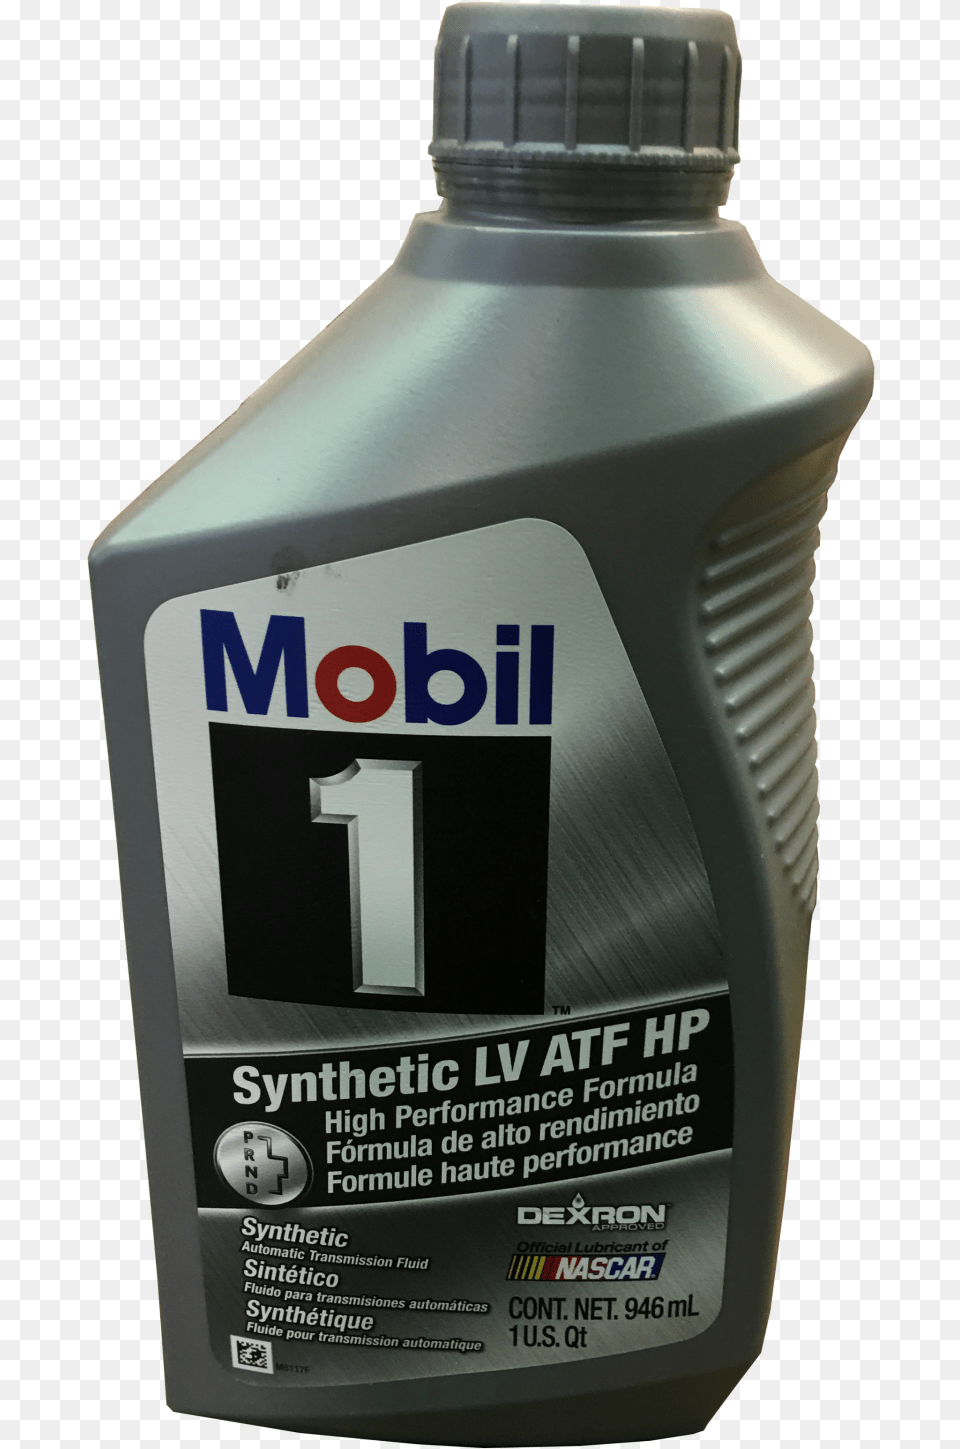 Mobil 1 Lv Atf Hp Mobil Lv Atf Hp, Bottle, Cosmetics, Perfume, Aftershave Free Png Download